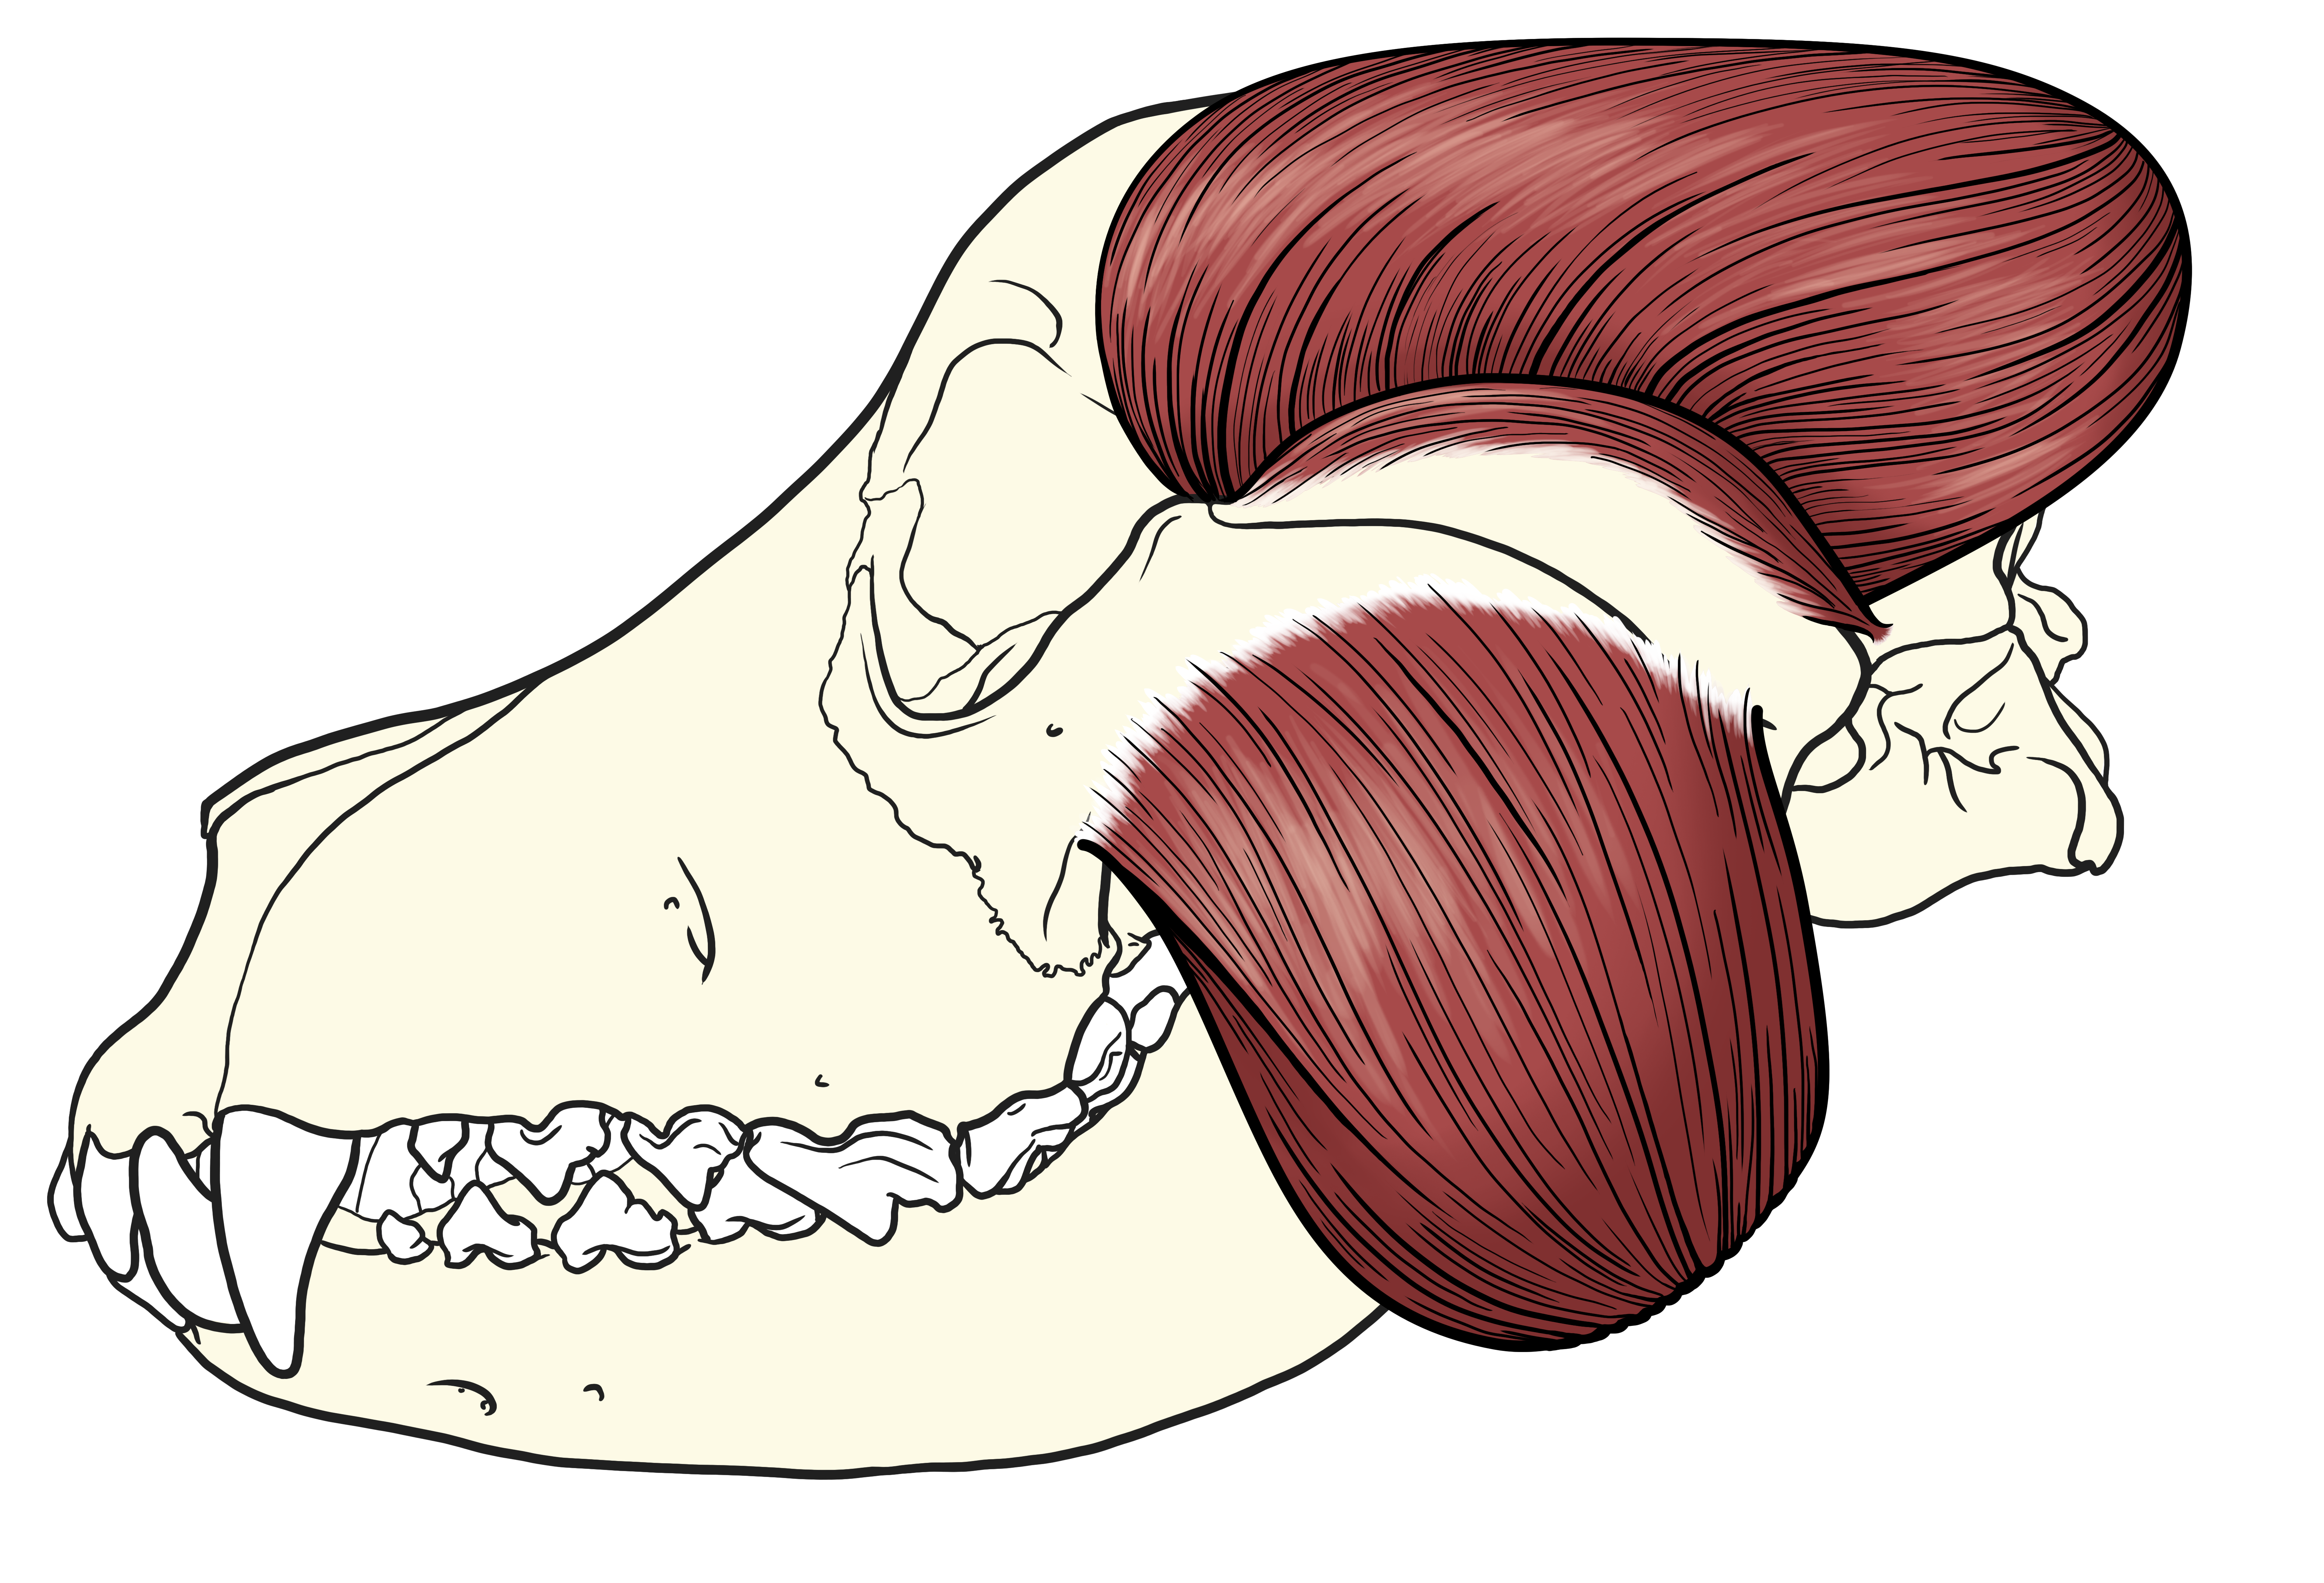 Drawn image of jaw muscles 